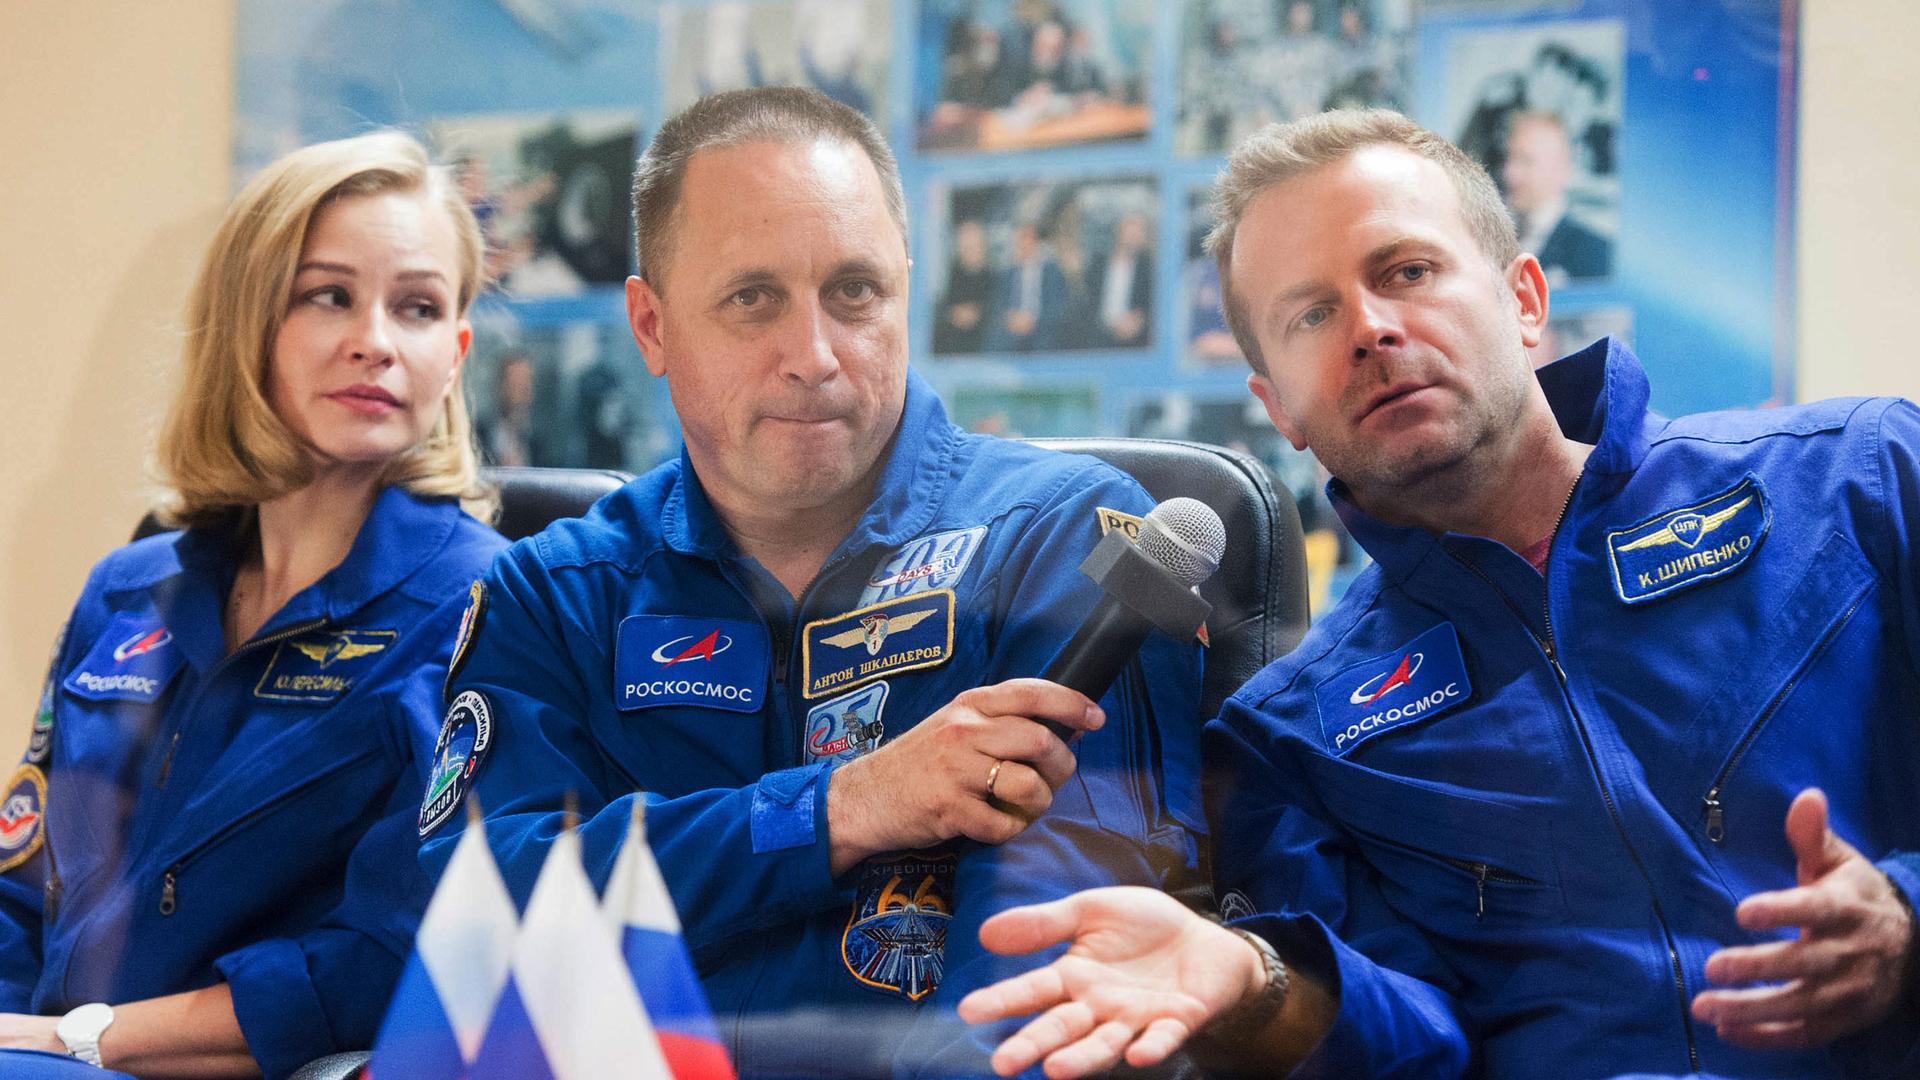 A woman and two men are sitting next to each other wearing blue Russian cosmonaut uniforms with the middle person holding a microphone.